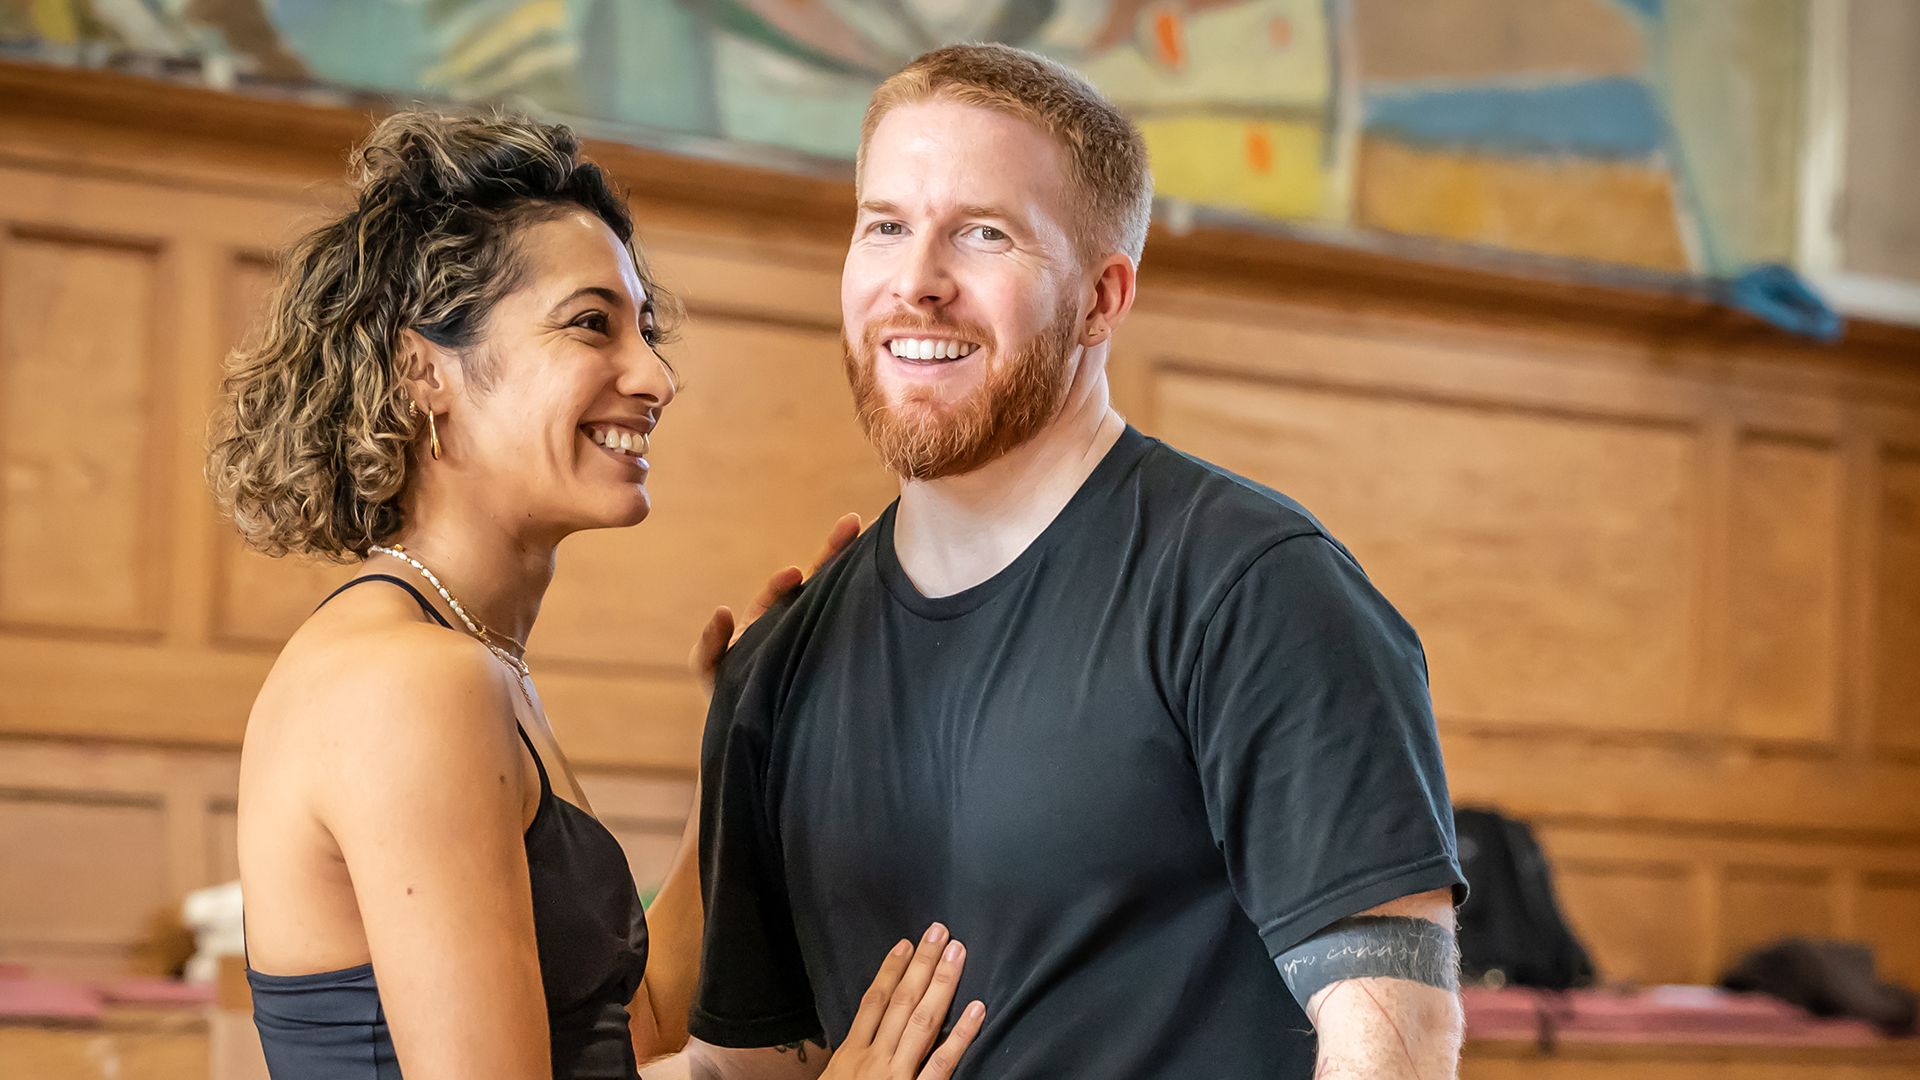 Karen Hauer places a hand on Neil Jones' stomach during Strictly rehearsals